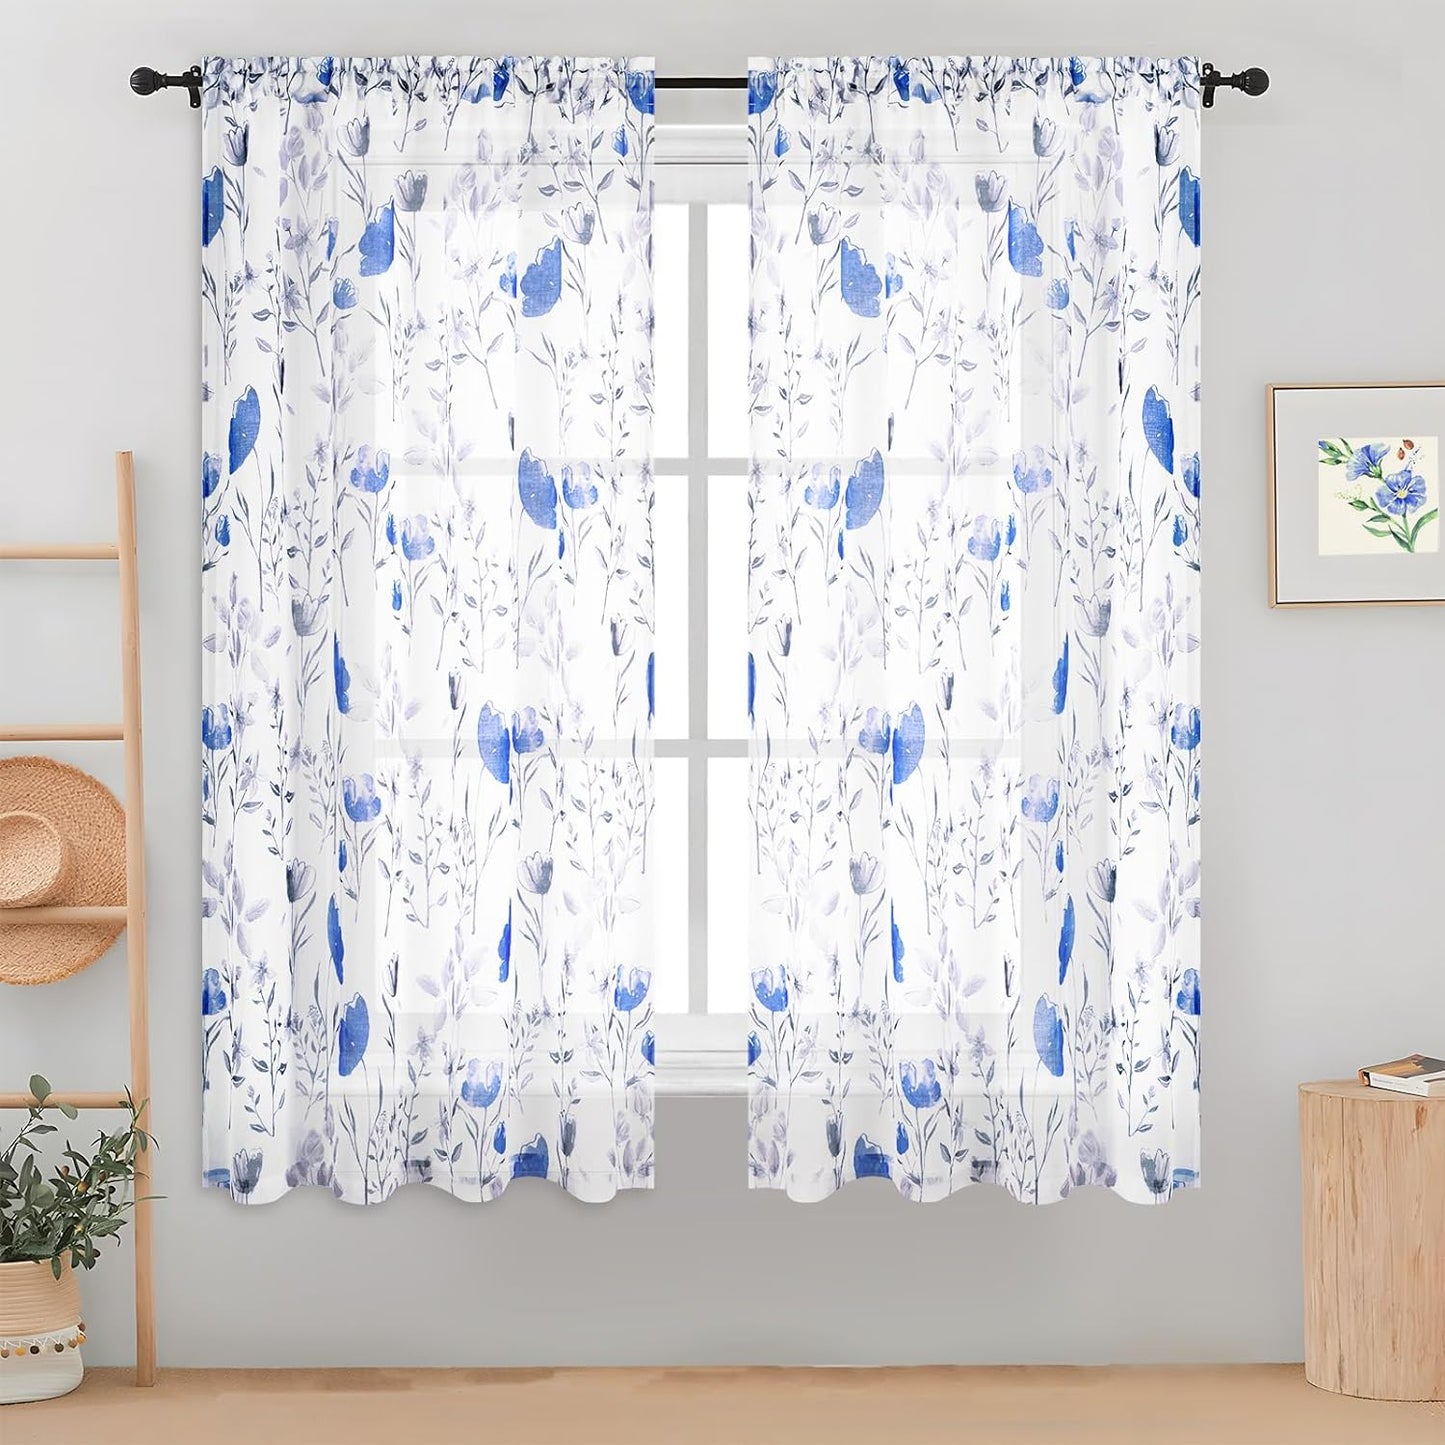 Likiyol Floral Kithchen Curtains 36 Inch Watercolor Flower Leaves Tier Curtains, Yellow and Gray Floral Cafe Curtains, Rod Pocket Small Window Curtain for Cafe Bathroom Bedroom Drapes  Likiyol Blue Sheer 63"L X 52"W 